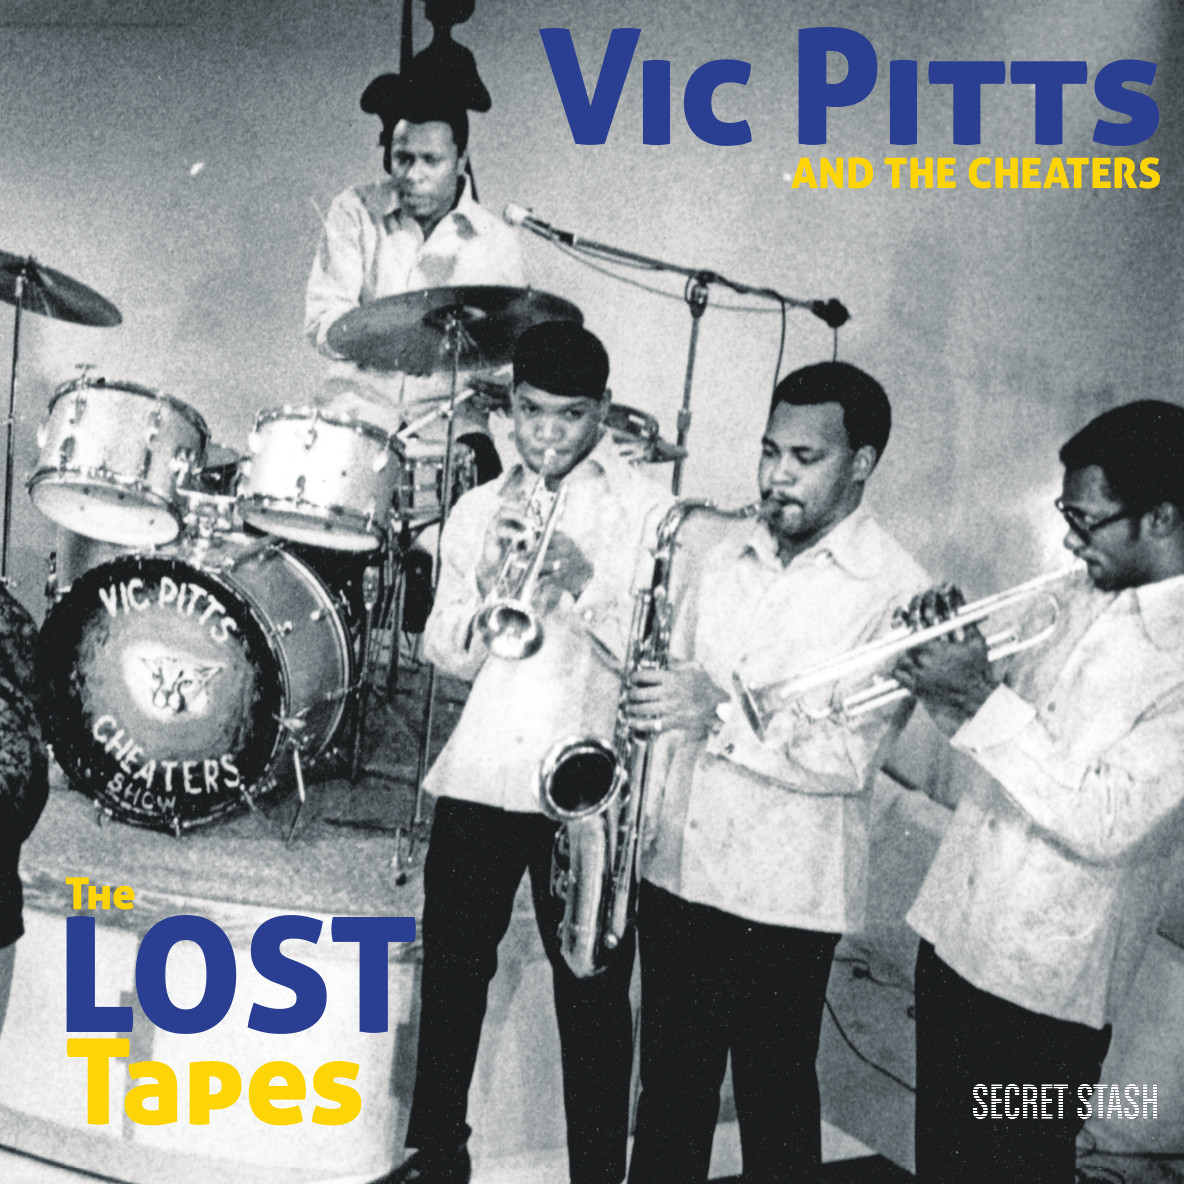 Vic Pitts & The Cheaters/LOST TAPES LP